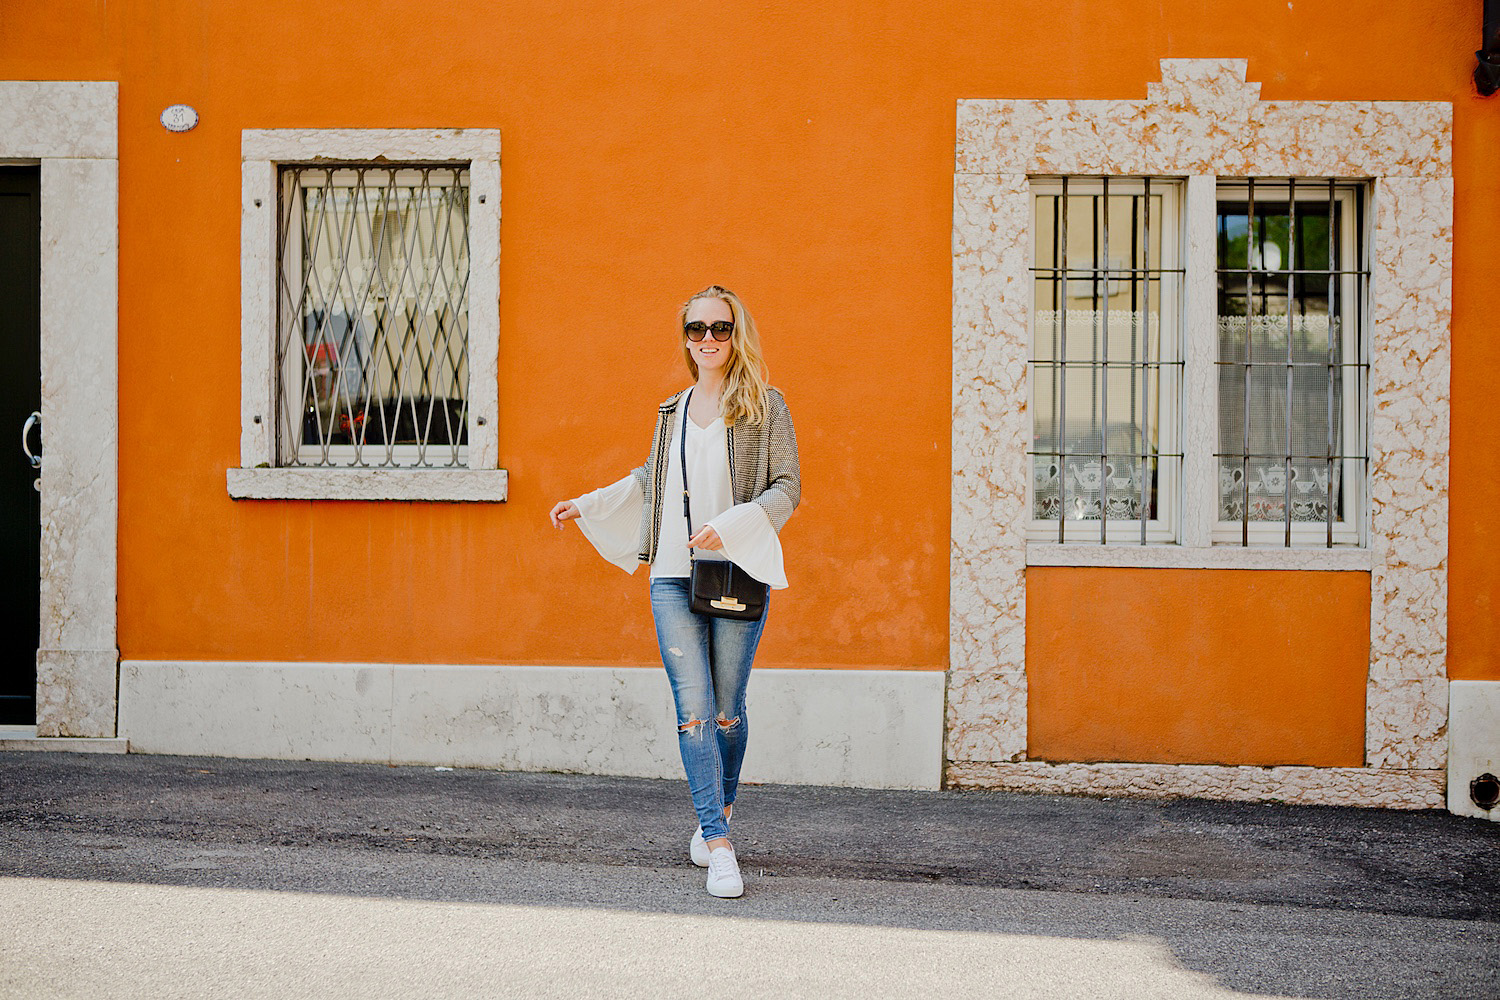 Transition into fall | autumn look inspiration - More & More Bouclé Jacket, white blouse, jeans, Superga